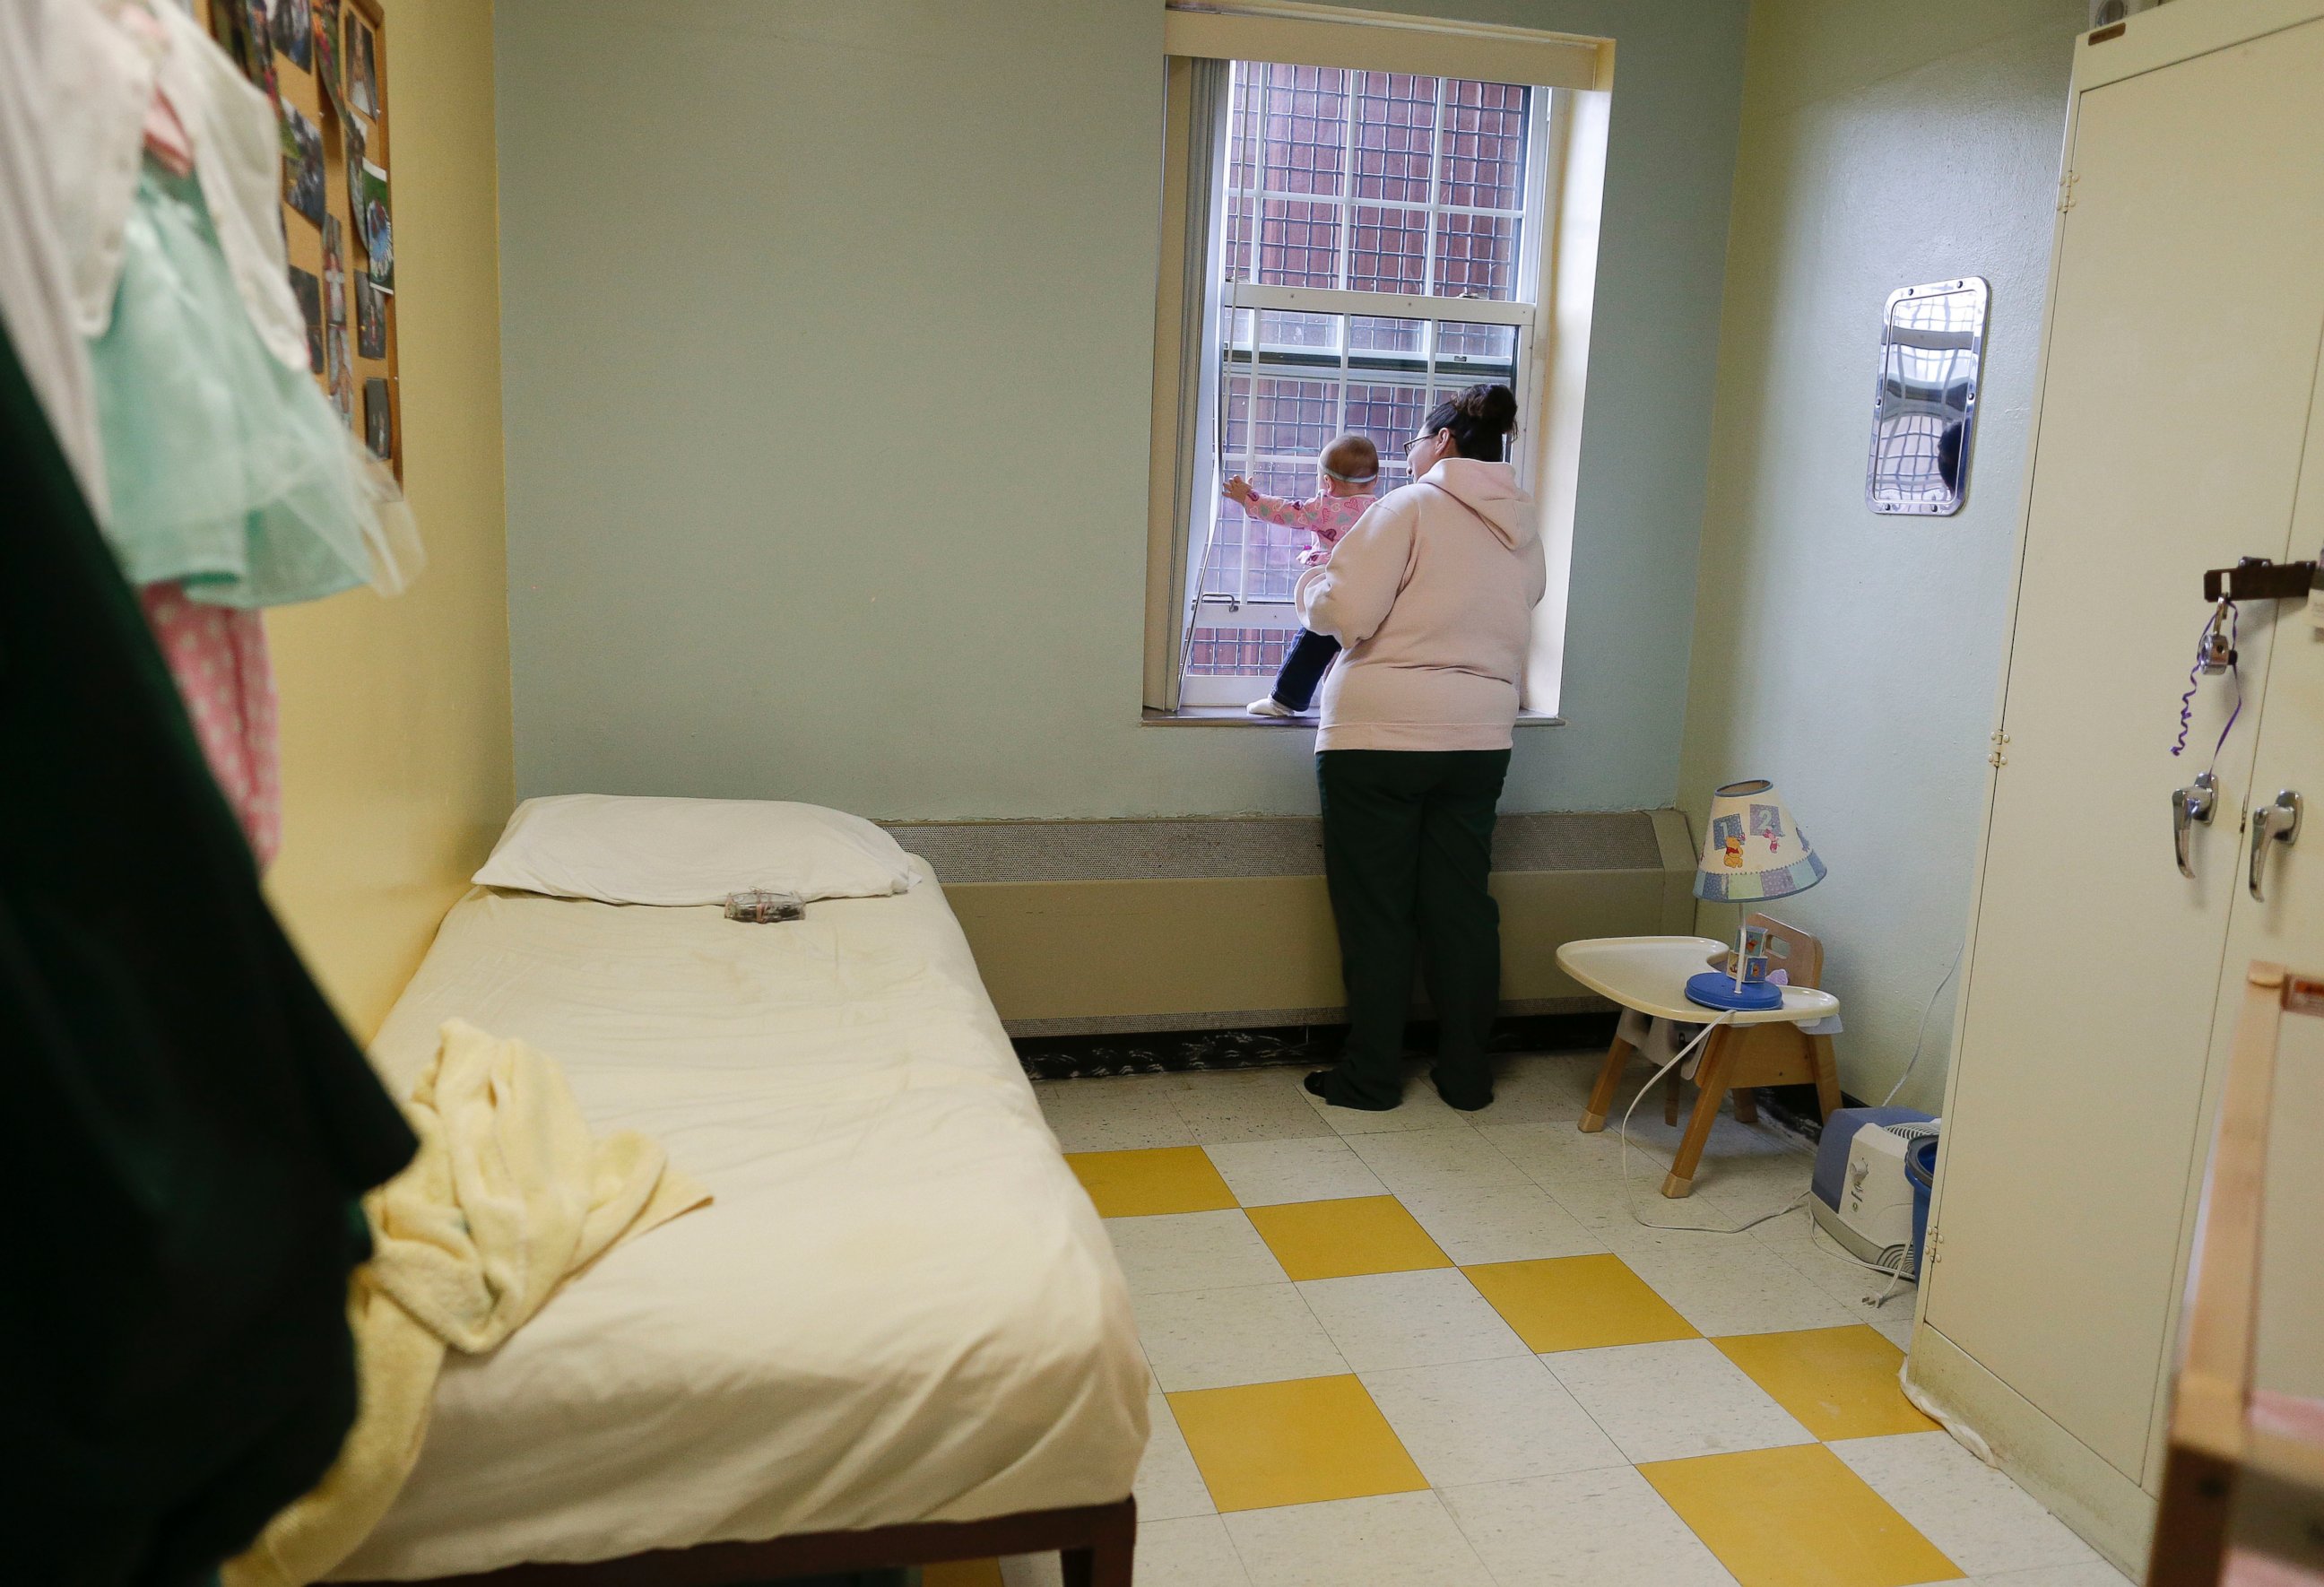 PHOTO: Jennifer Dumas looks out the window with her daughter, Codylynn, inside her room at Bedford Hills Correctional Facility, in Bedford Hills, N.Y., April 12, 2016.